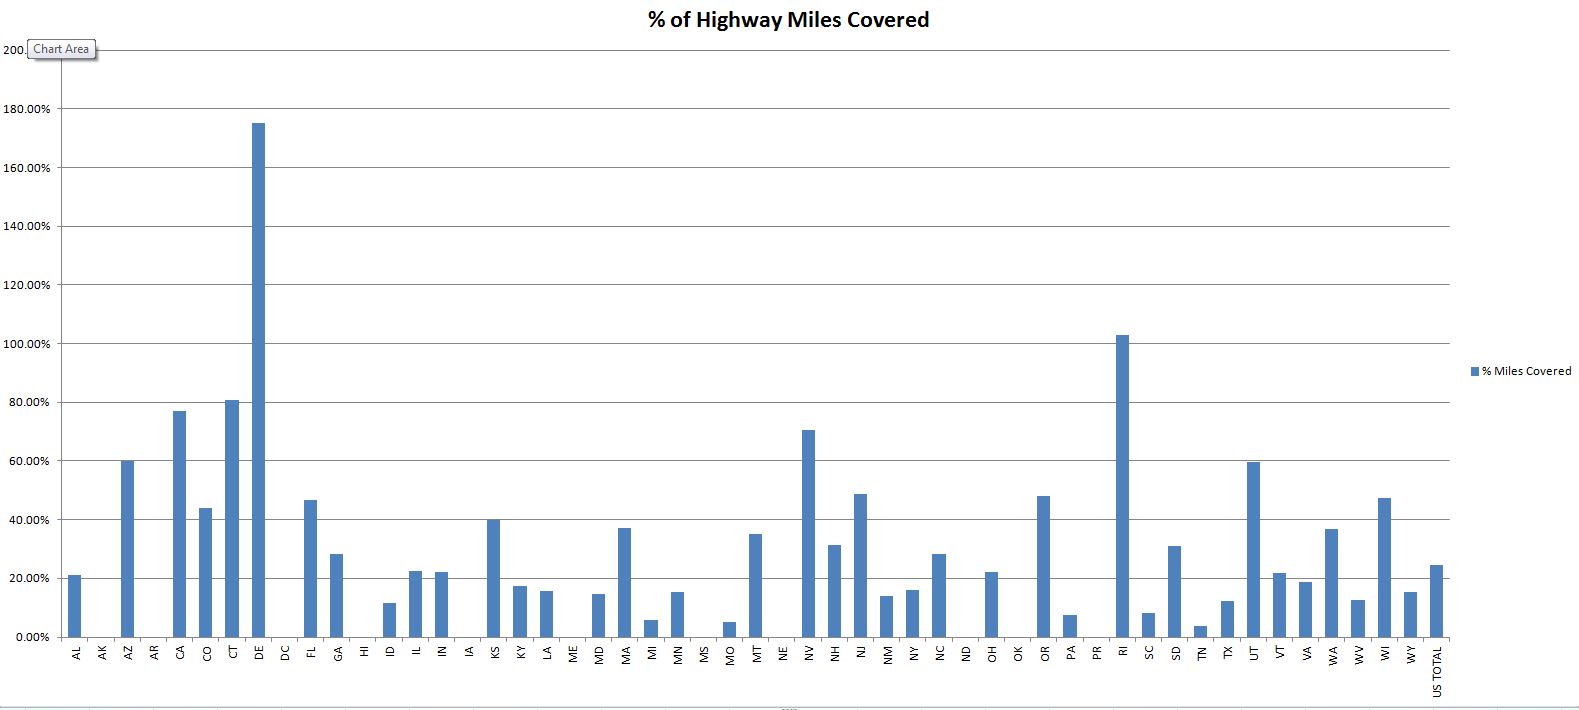 percent highway miles covered.JPG